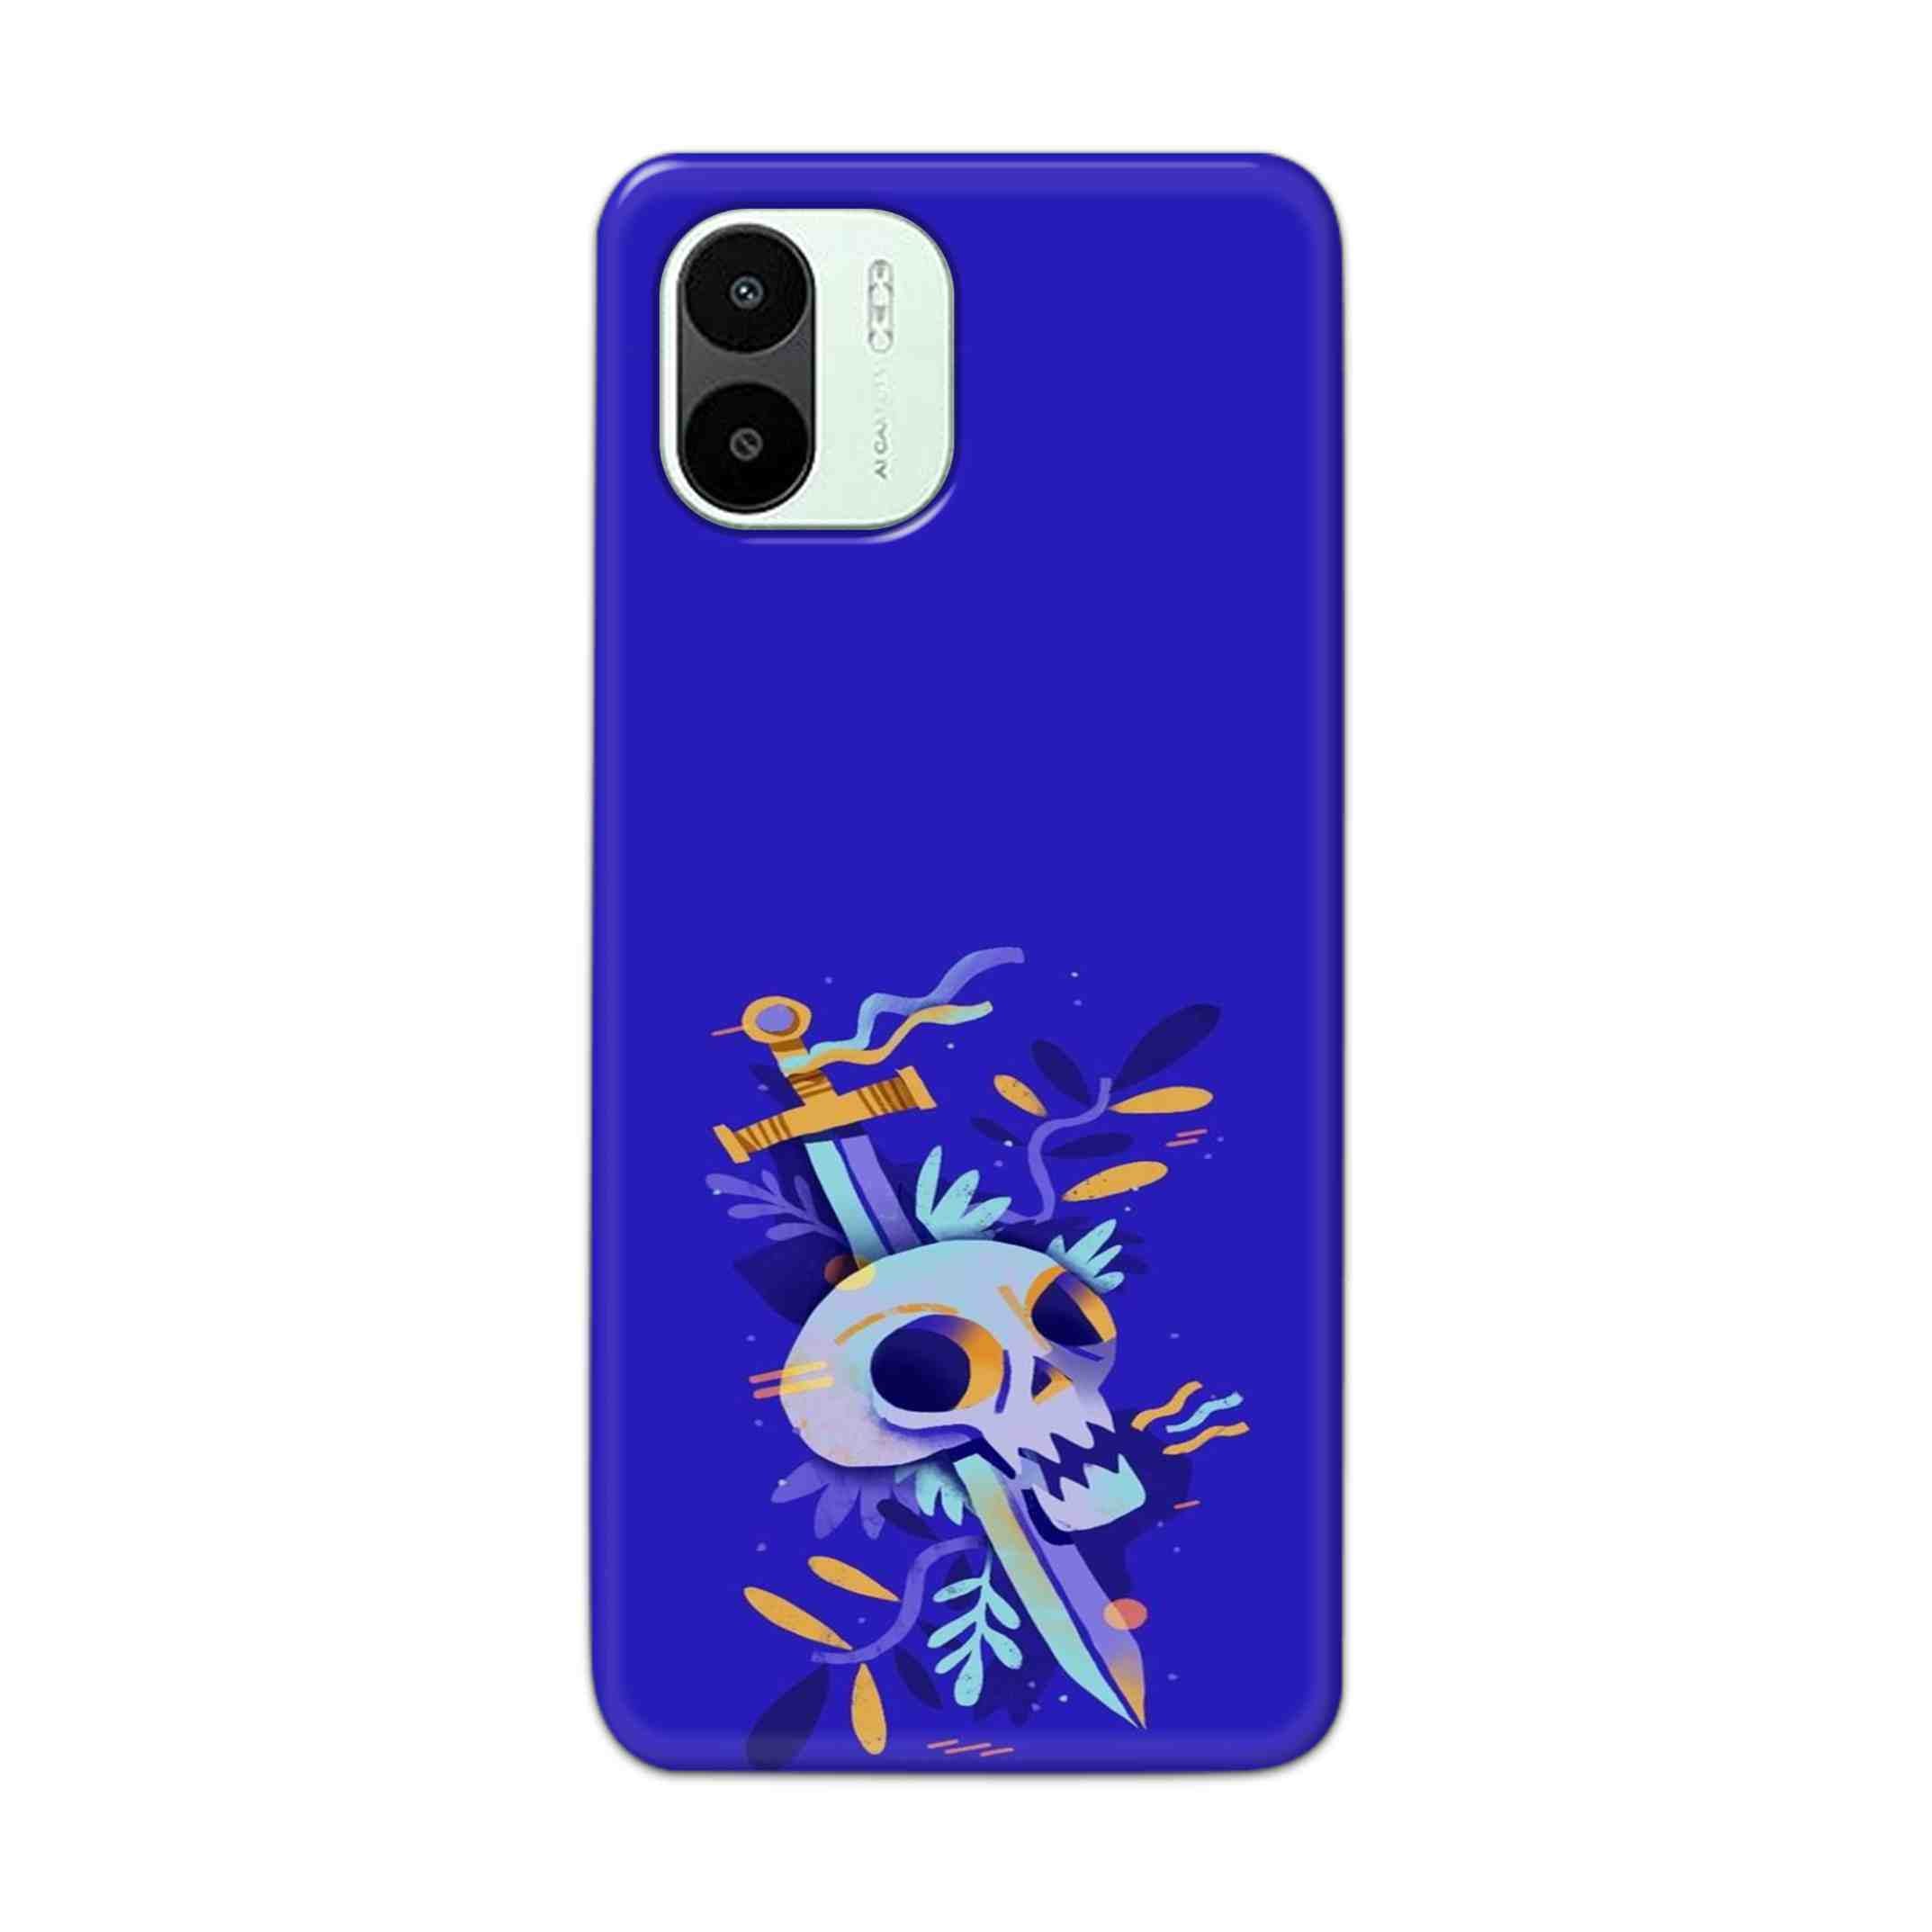 Buy Blue Skull Hard Back Mobile Phone Case Cover For Xiaomi Redmi A1 5G Online